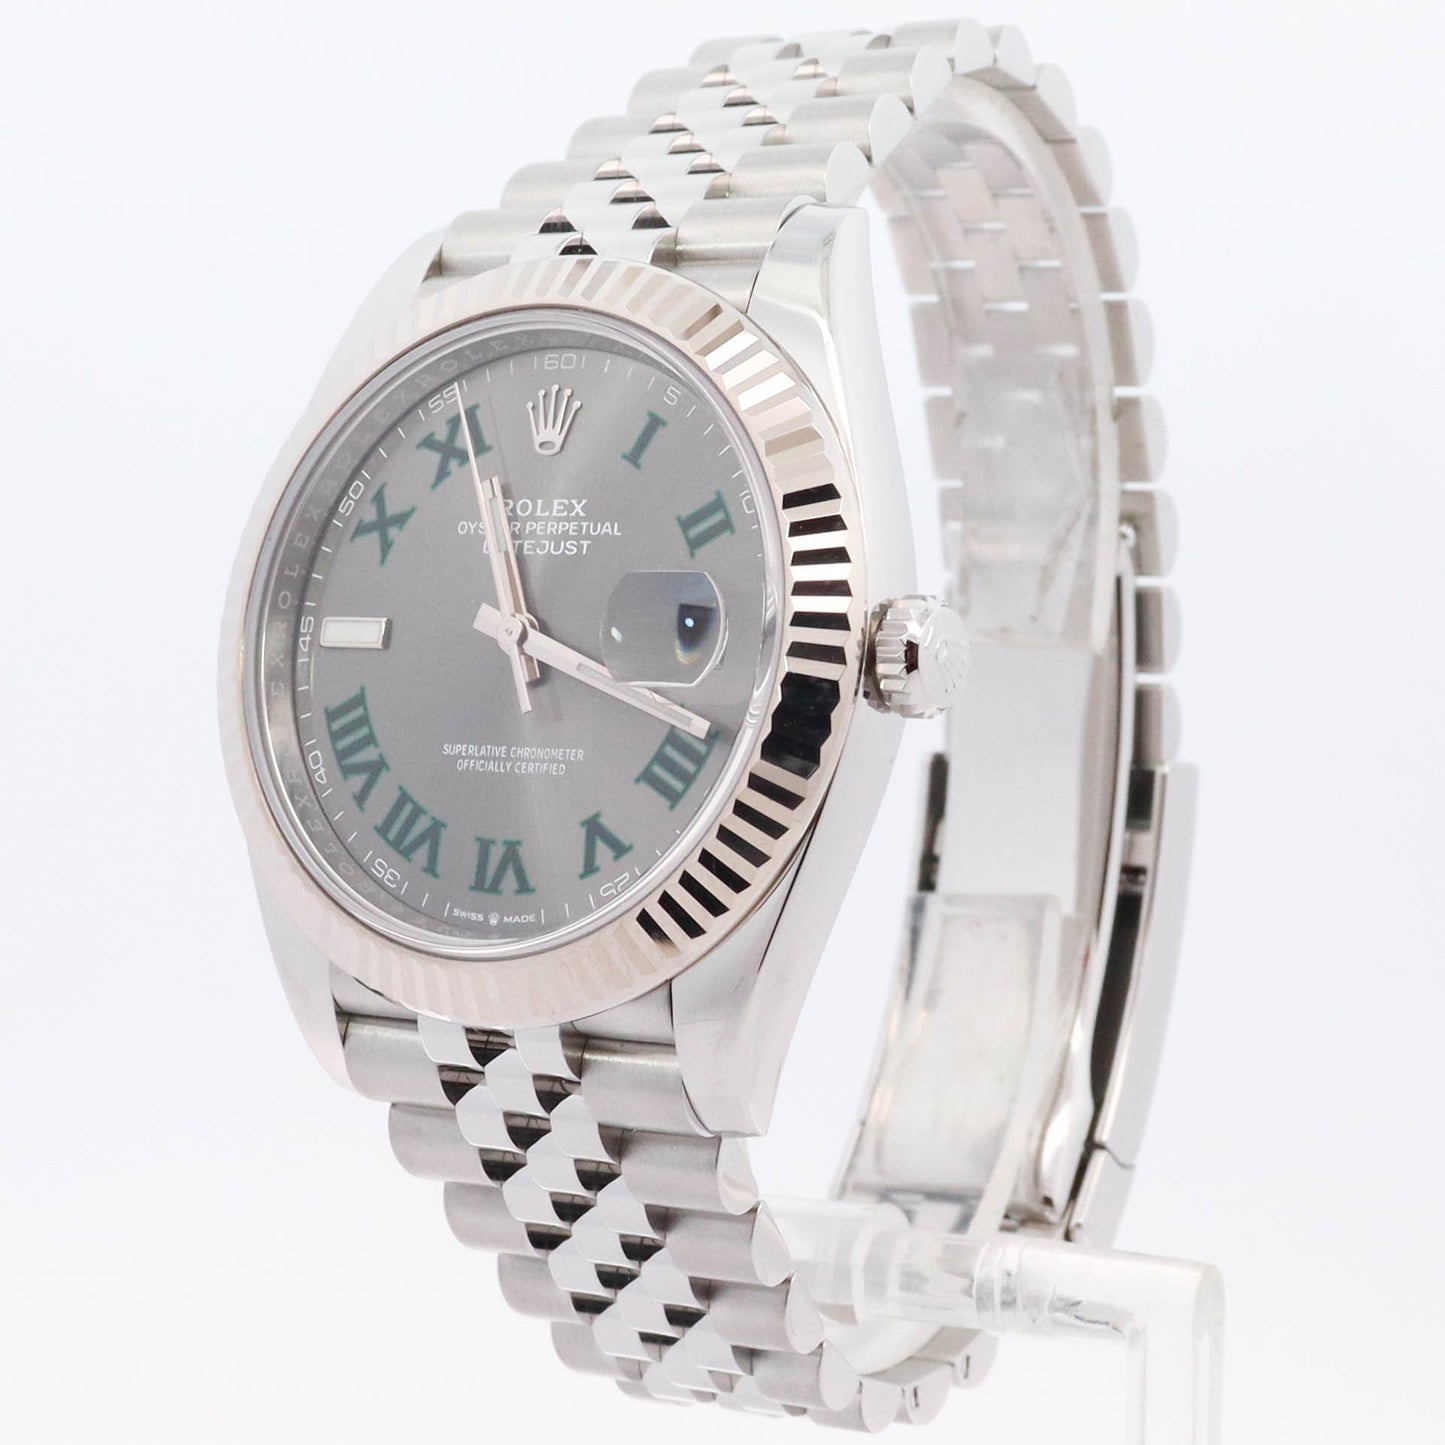 Rolex Datejust 41mm Stainless Steel Slate Grey Roman Dial Watch Reference #: 126334